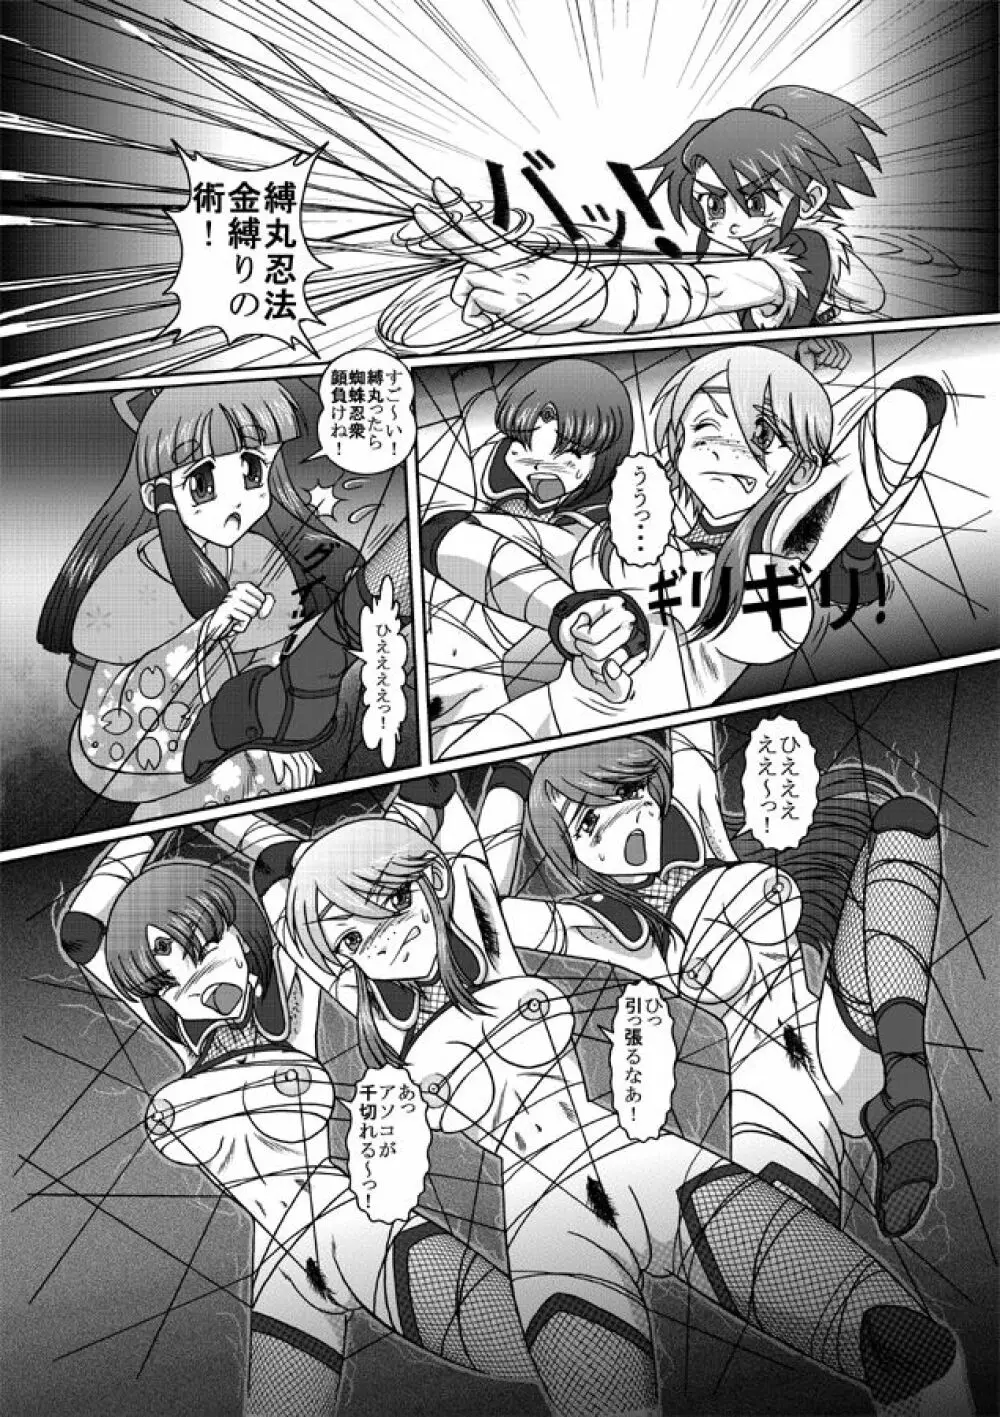 Same-themed manga about kid fighting female ninjas from japanese imageboard. Page.27